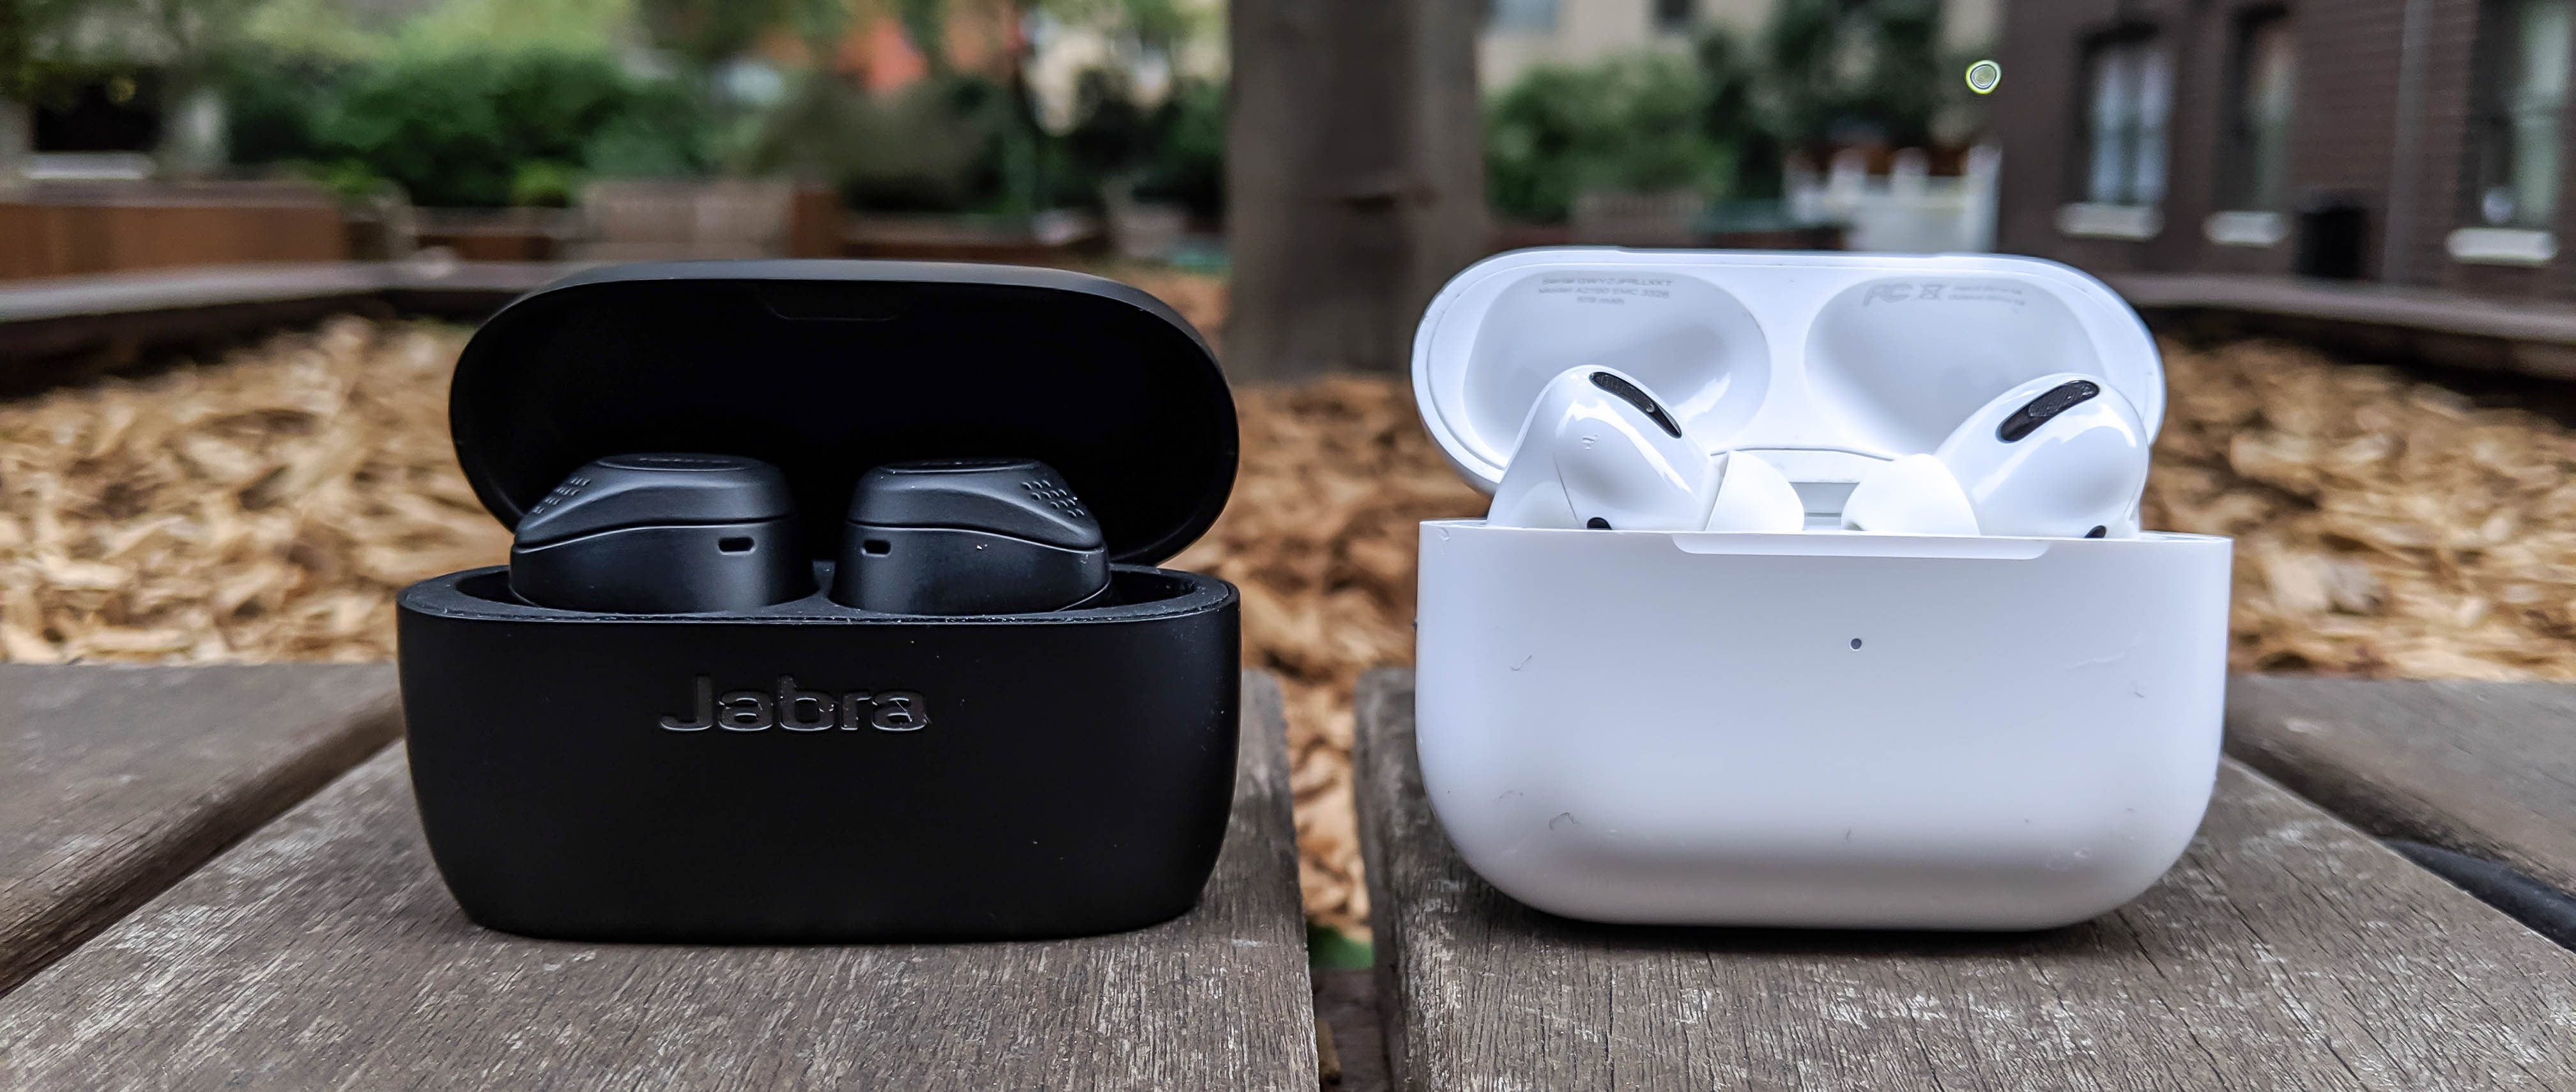 Apple AirPods Pro vs Jabra Elite 75t: Which wireless earbuds are the category leader? | Tom's Guide